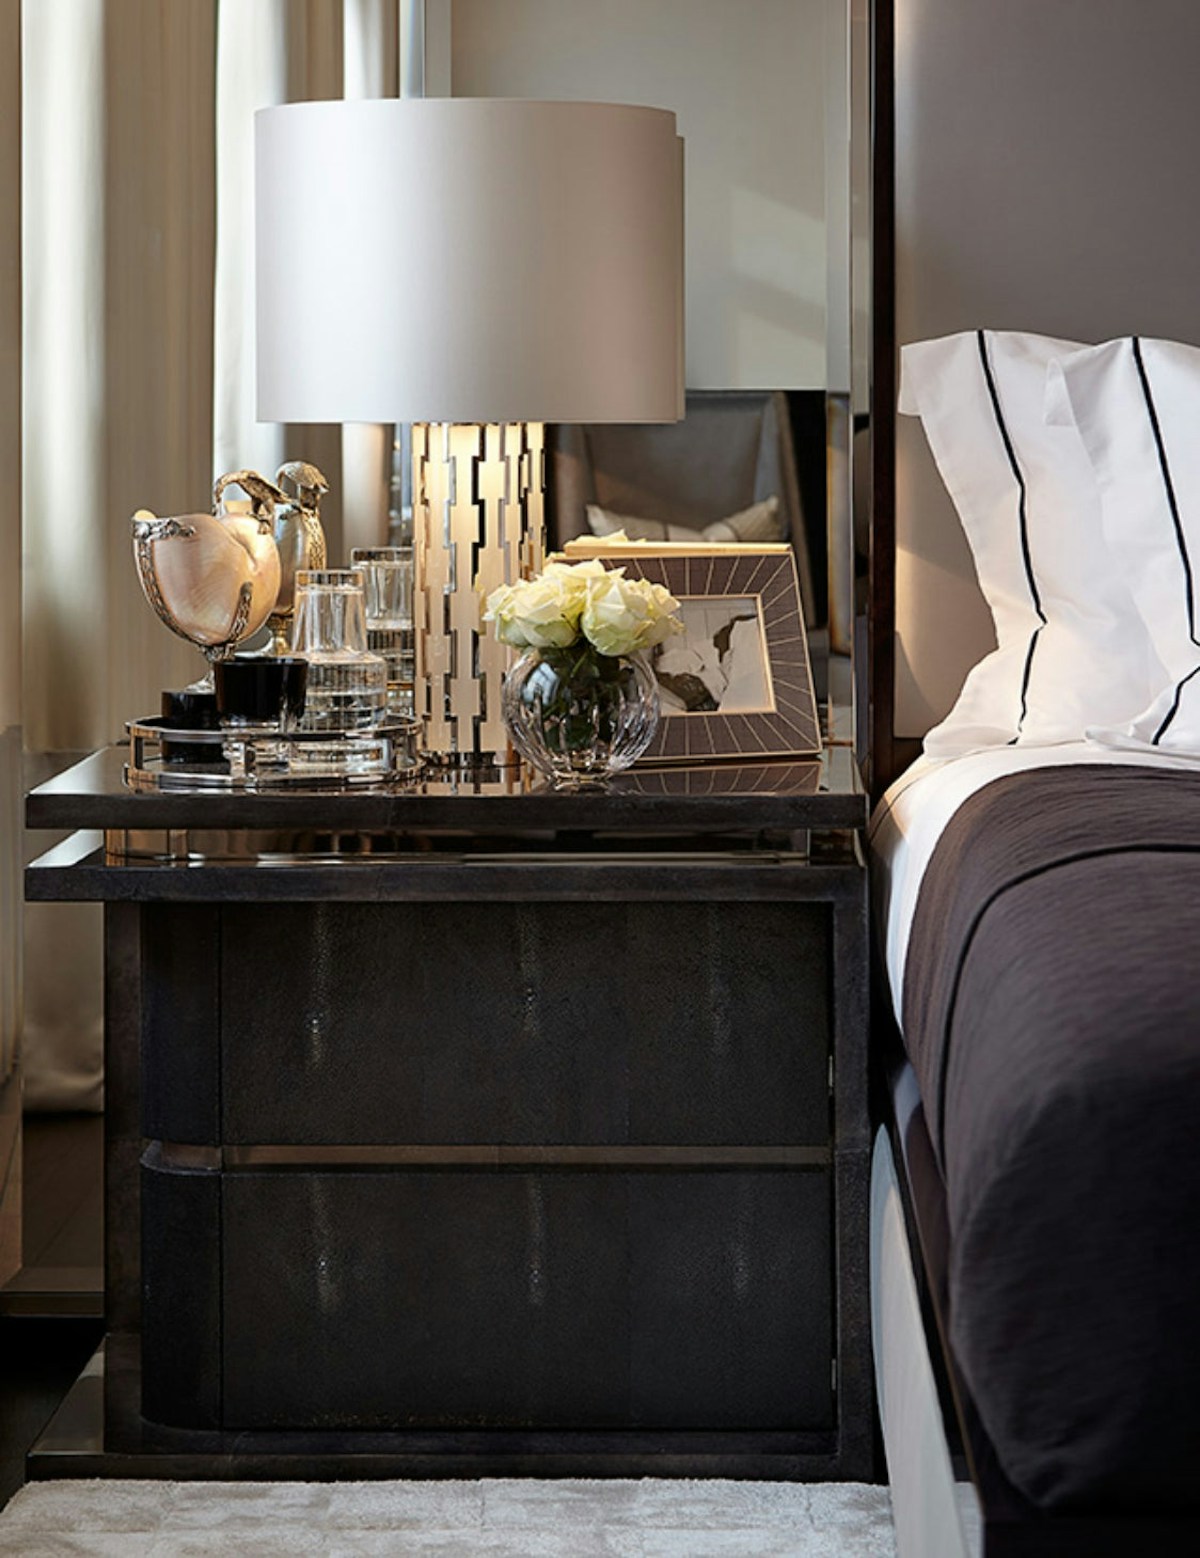 How To Style A Bedside Table - Styling Bedside Tables - Contrast and complement